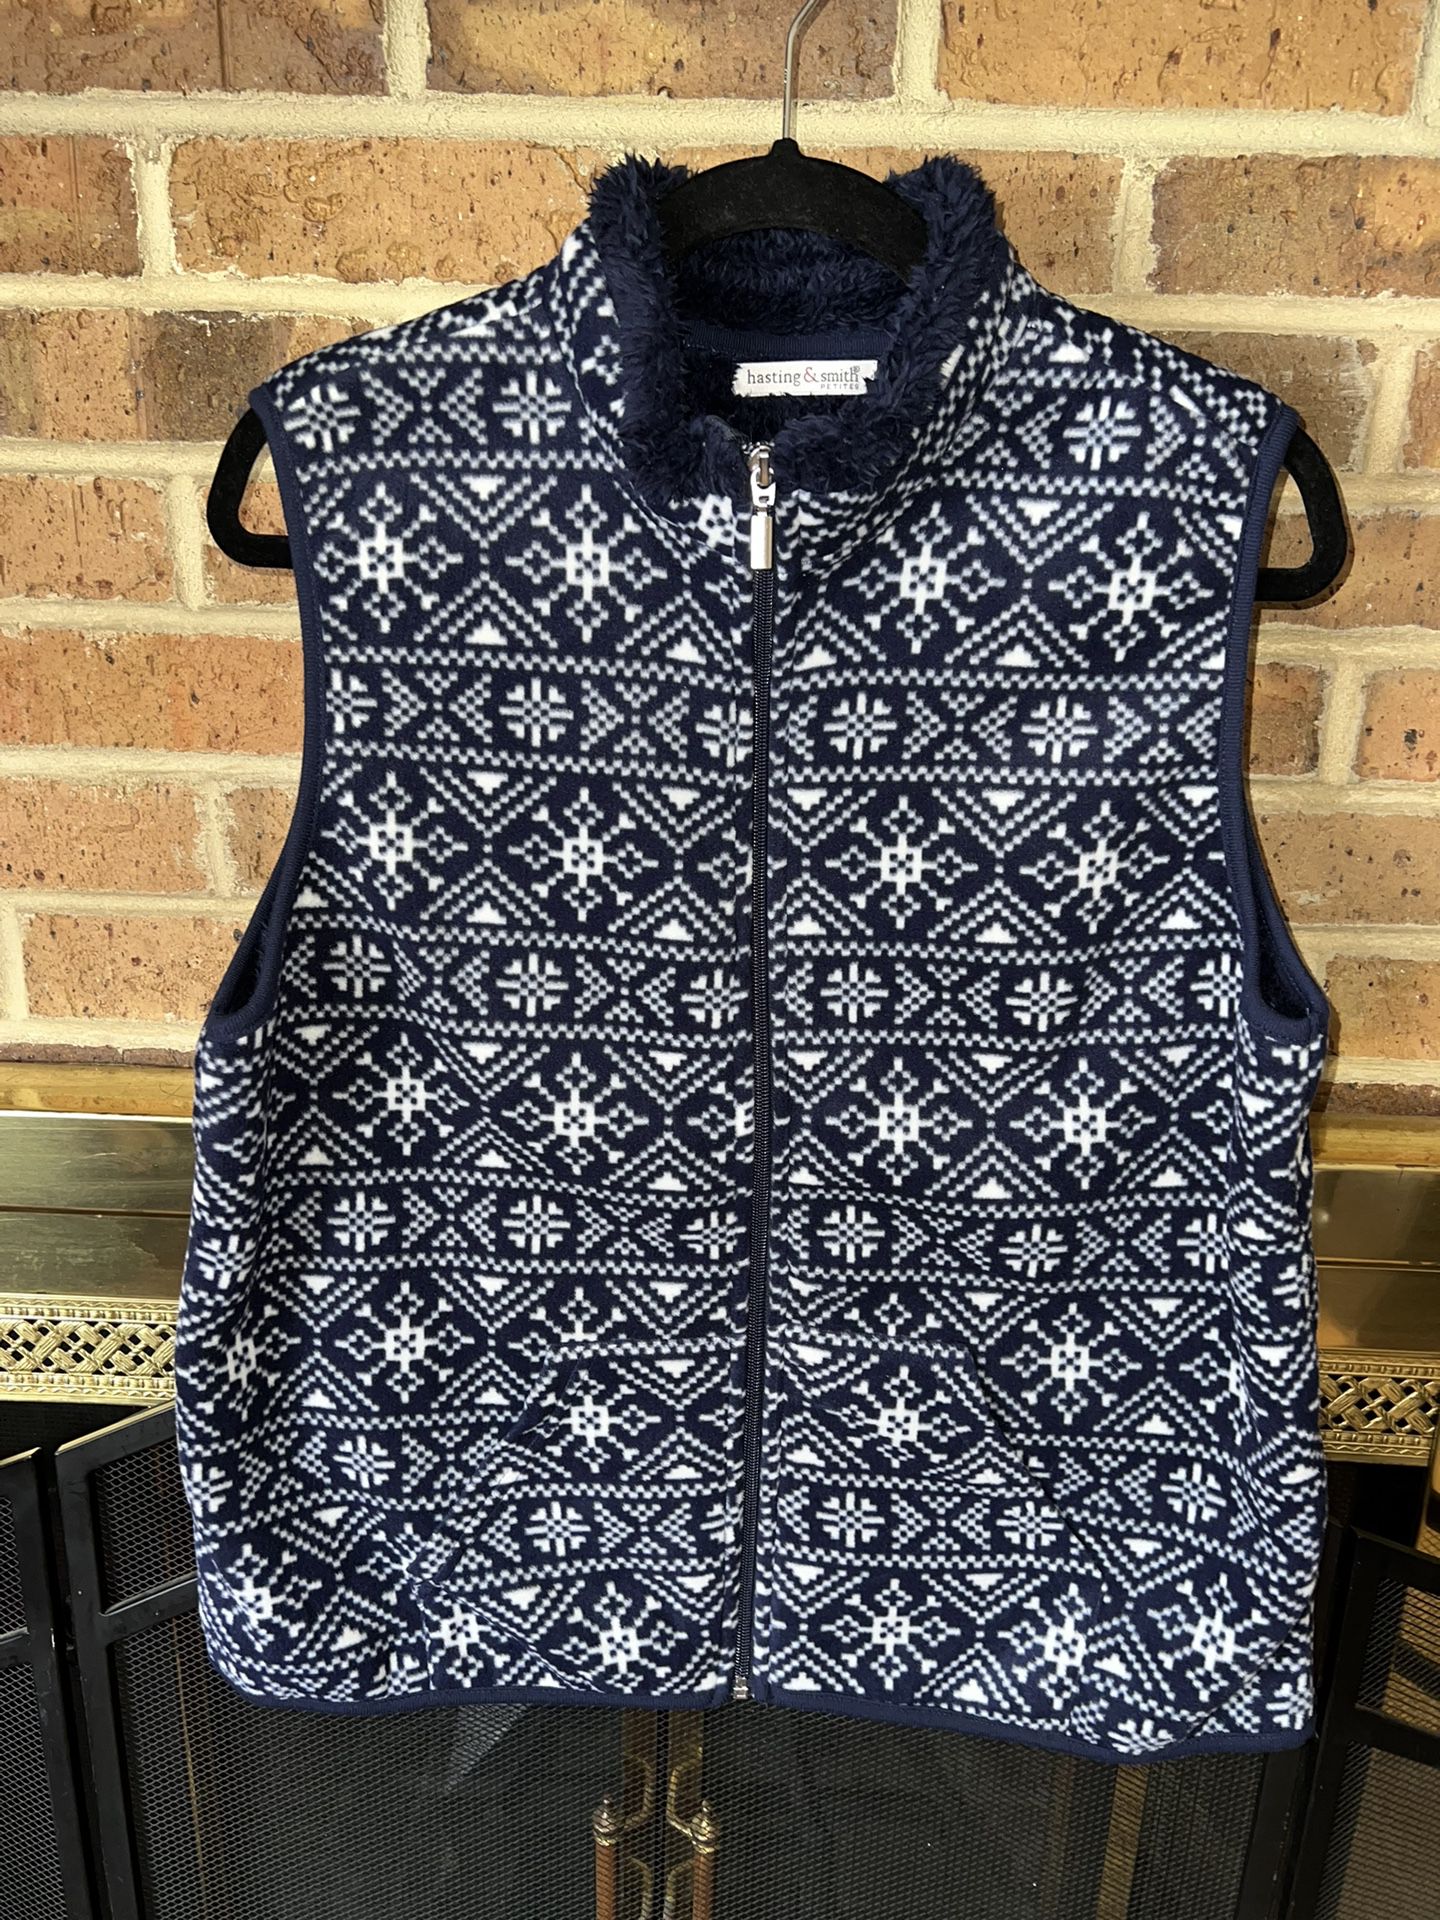 Ladies Hasting & Smith Petites soft navy vest with winter pattern petite large